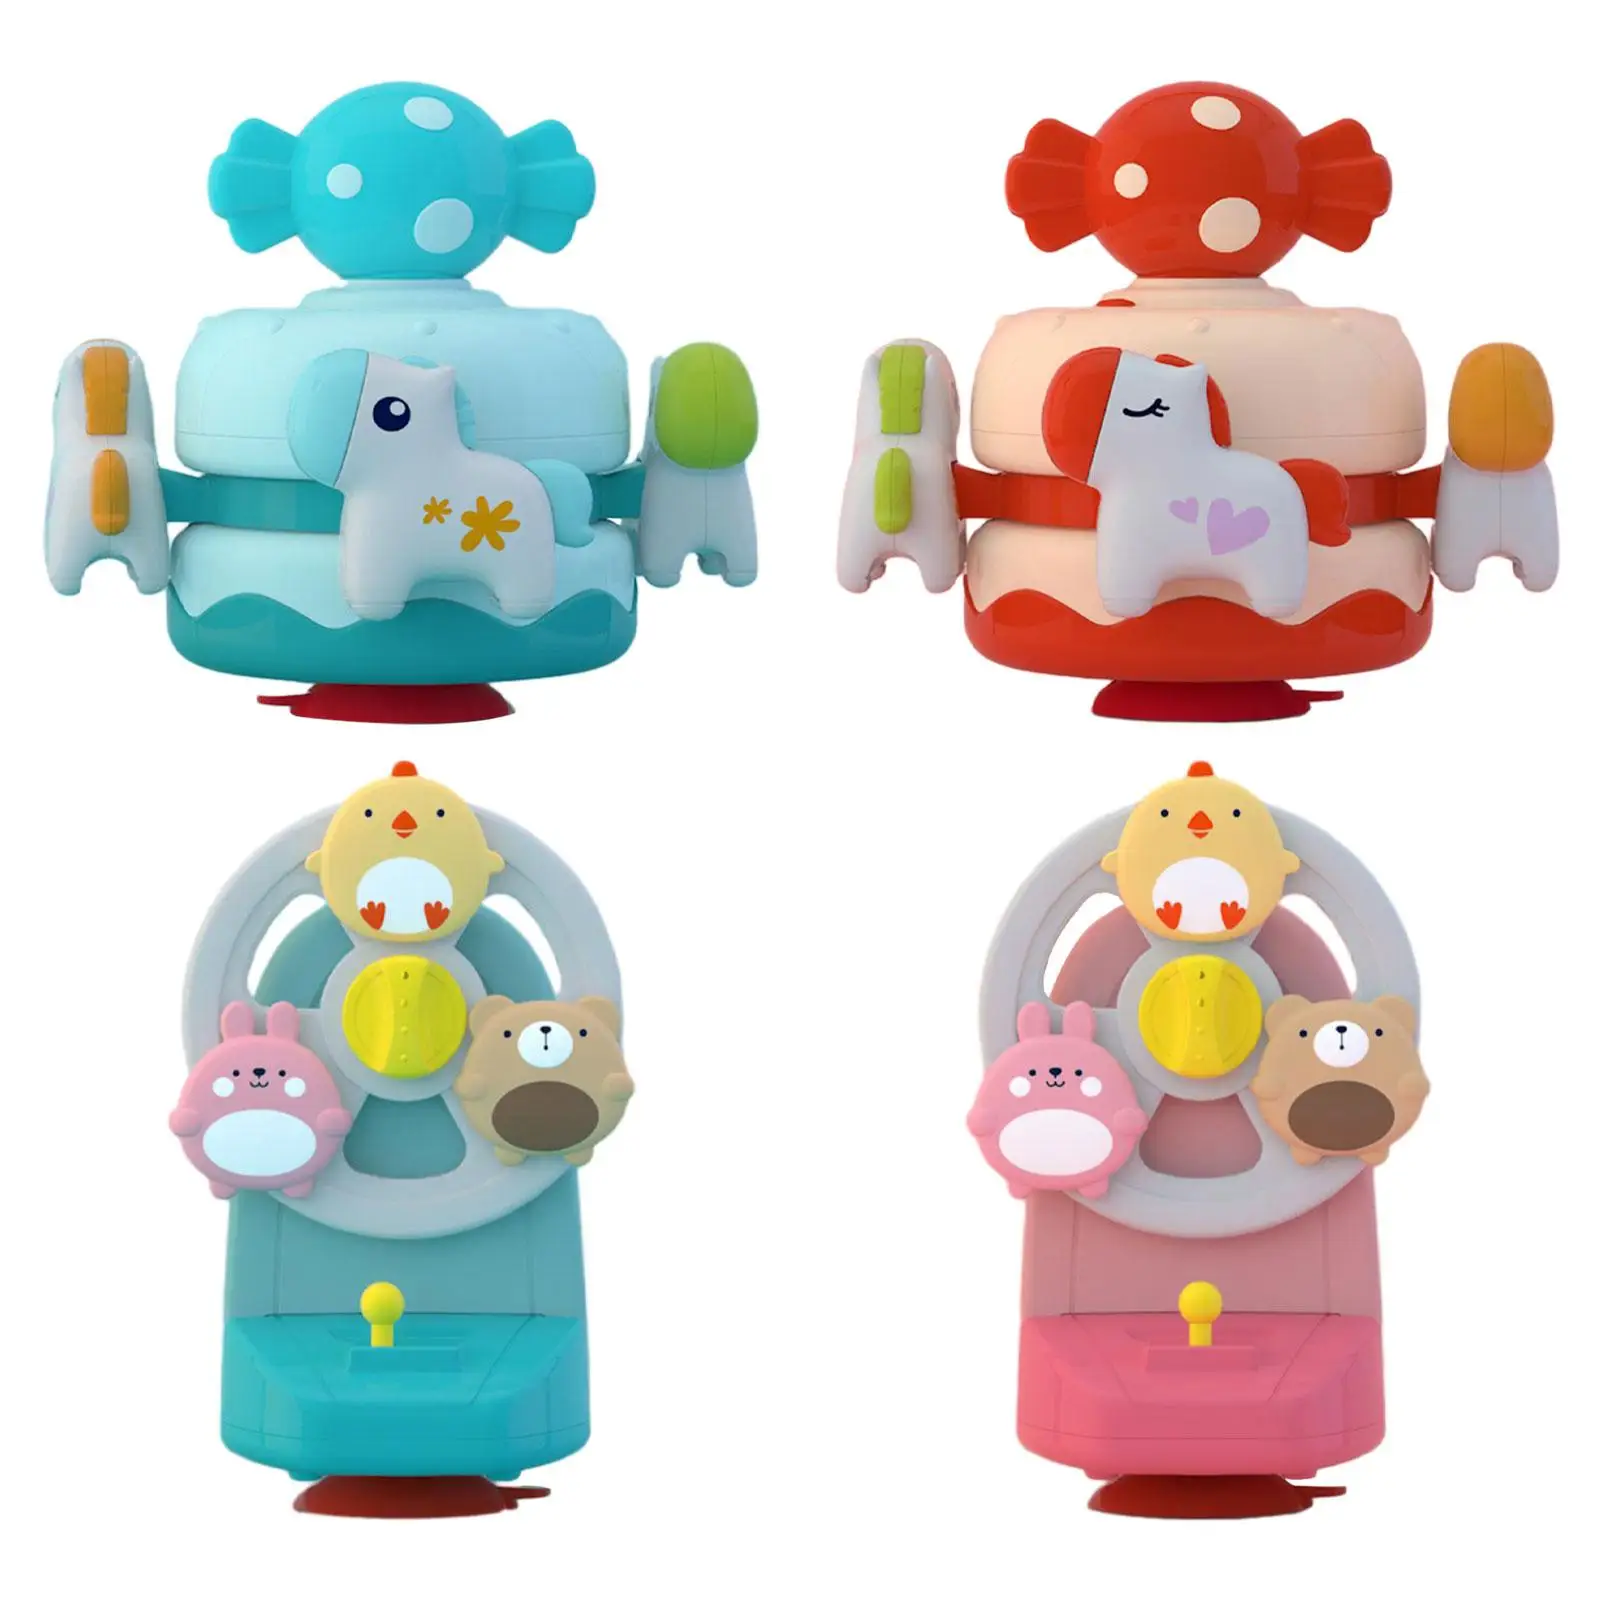 Craft Toys Mechanical Suction Cup Music Box Candy Carousel Music Box for Collectible Desktop Ornament Holiday Valentine's Decor